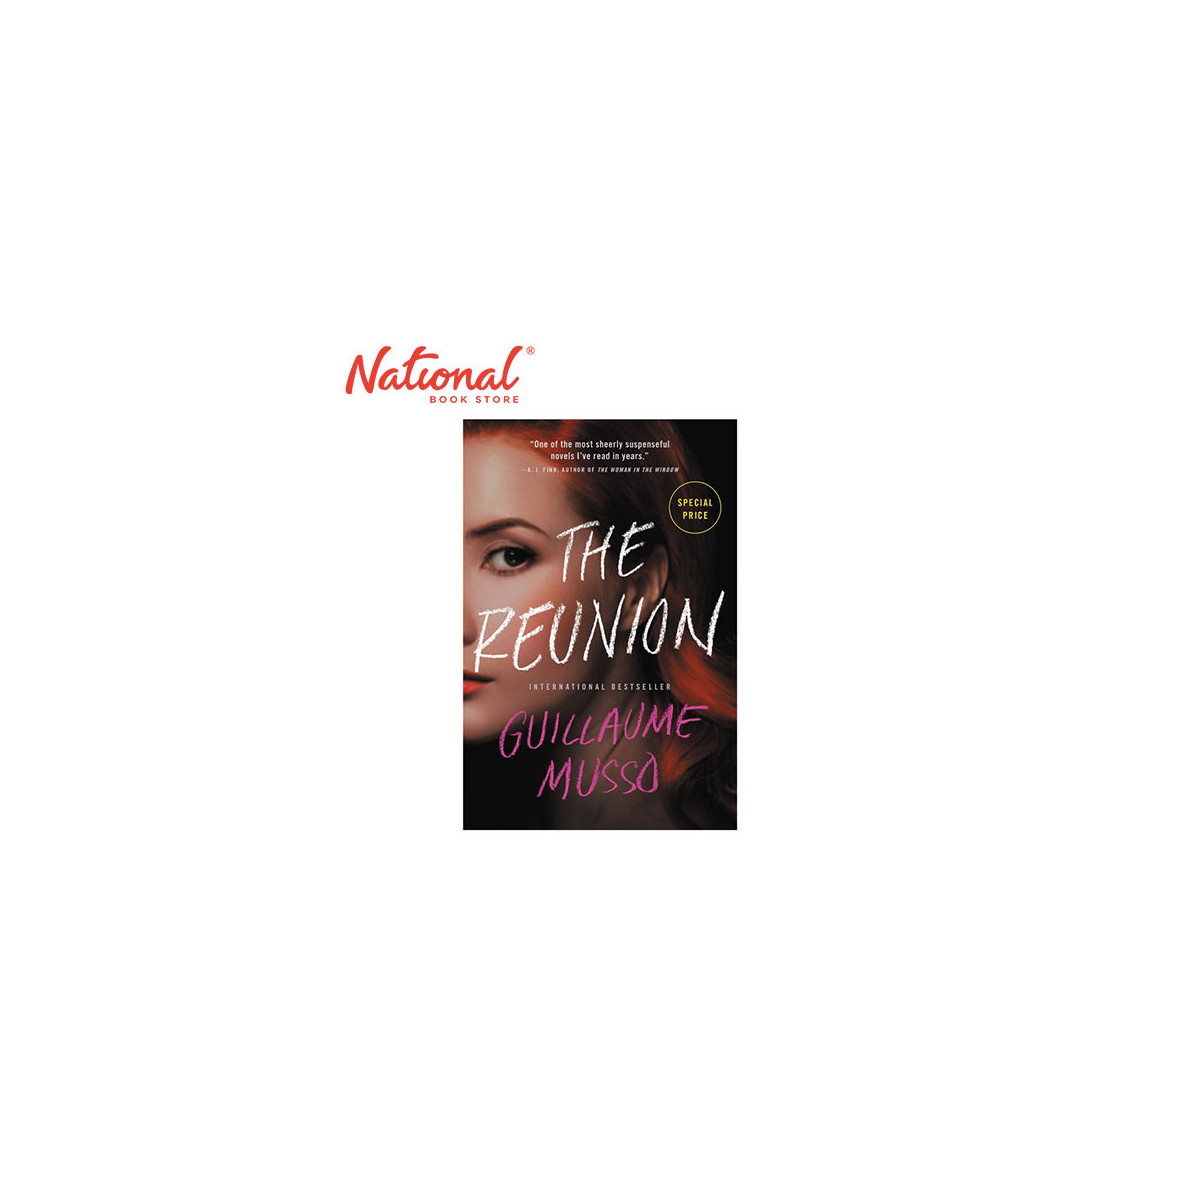 The Reunion by Guillaume Musso - Trade Paperback - Thriller - Mystery - Suspense